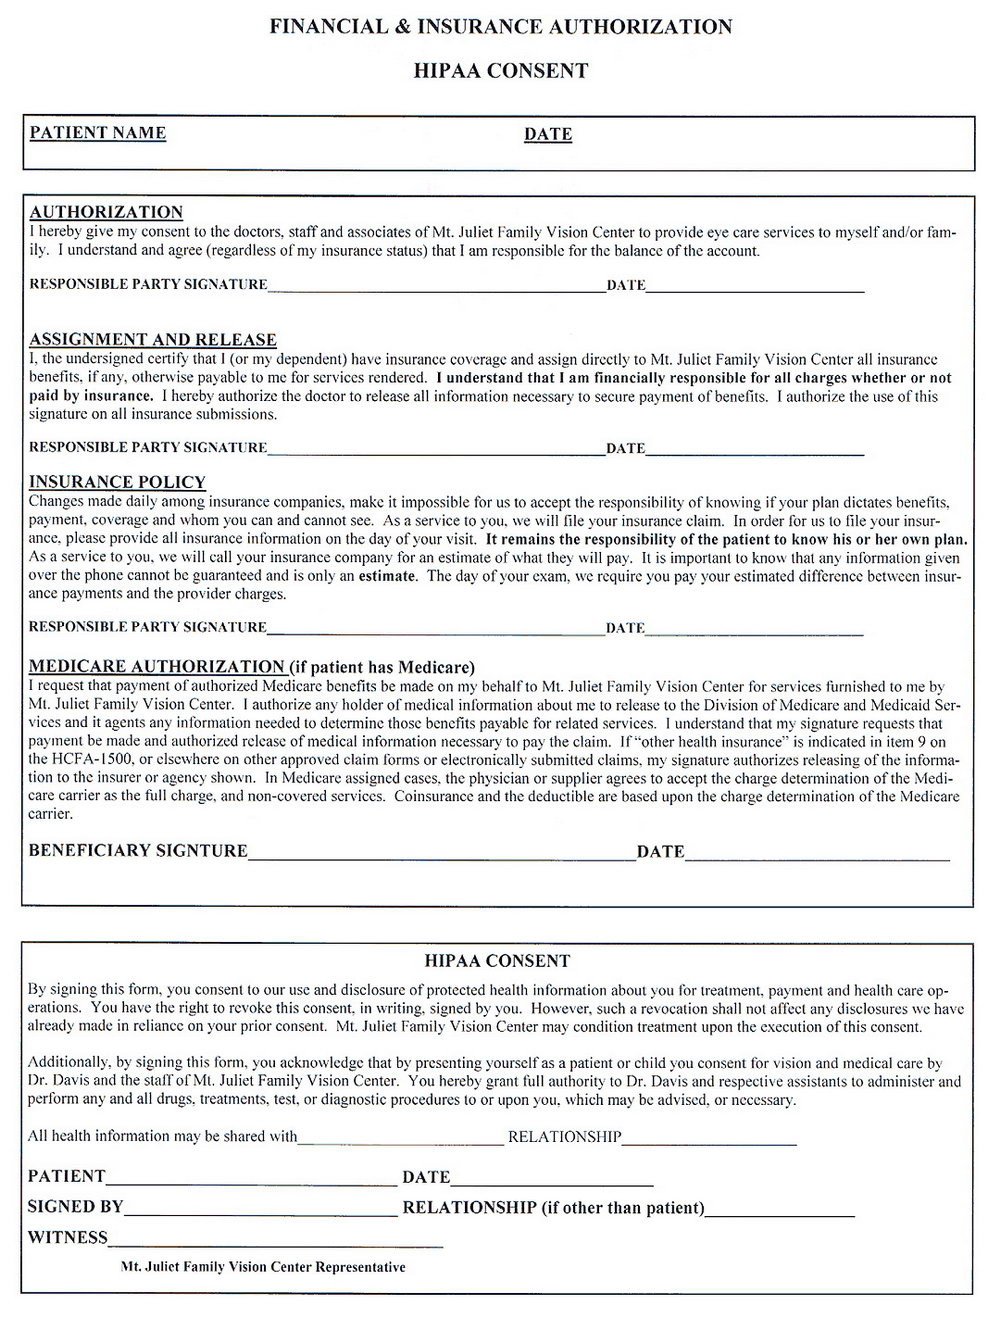 Hipaa Compliance forms for Employees Hipaa forms Printable 2018 Of Home Design